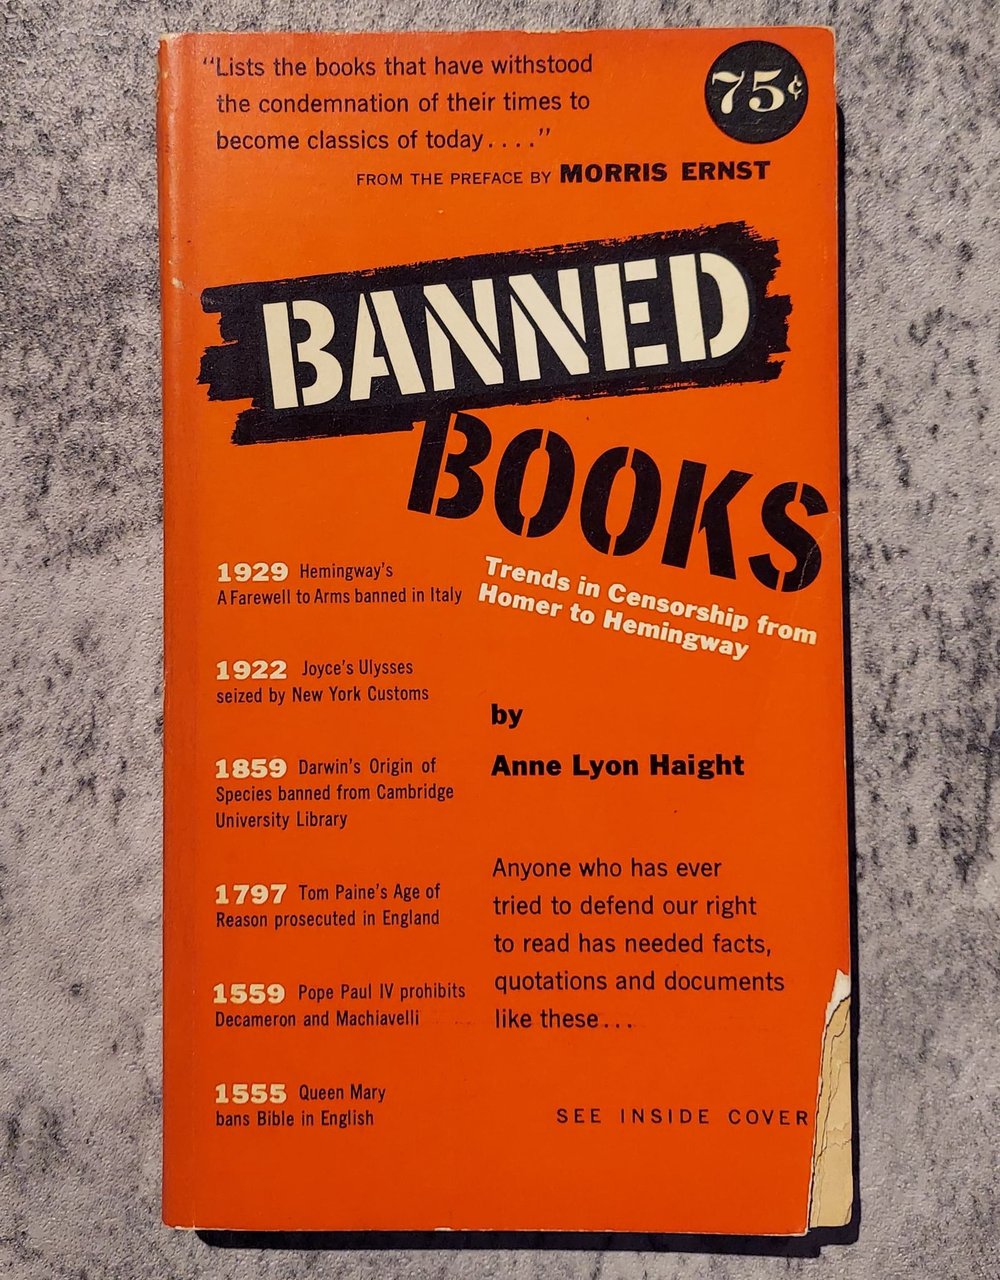 Banned Books: Trends in Censorship from Homer to Hemingway, by Anne Lyon Haight